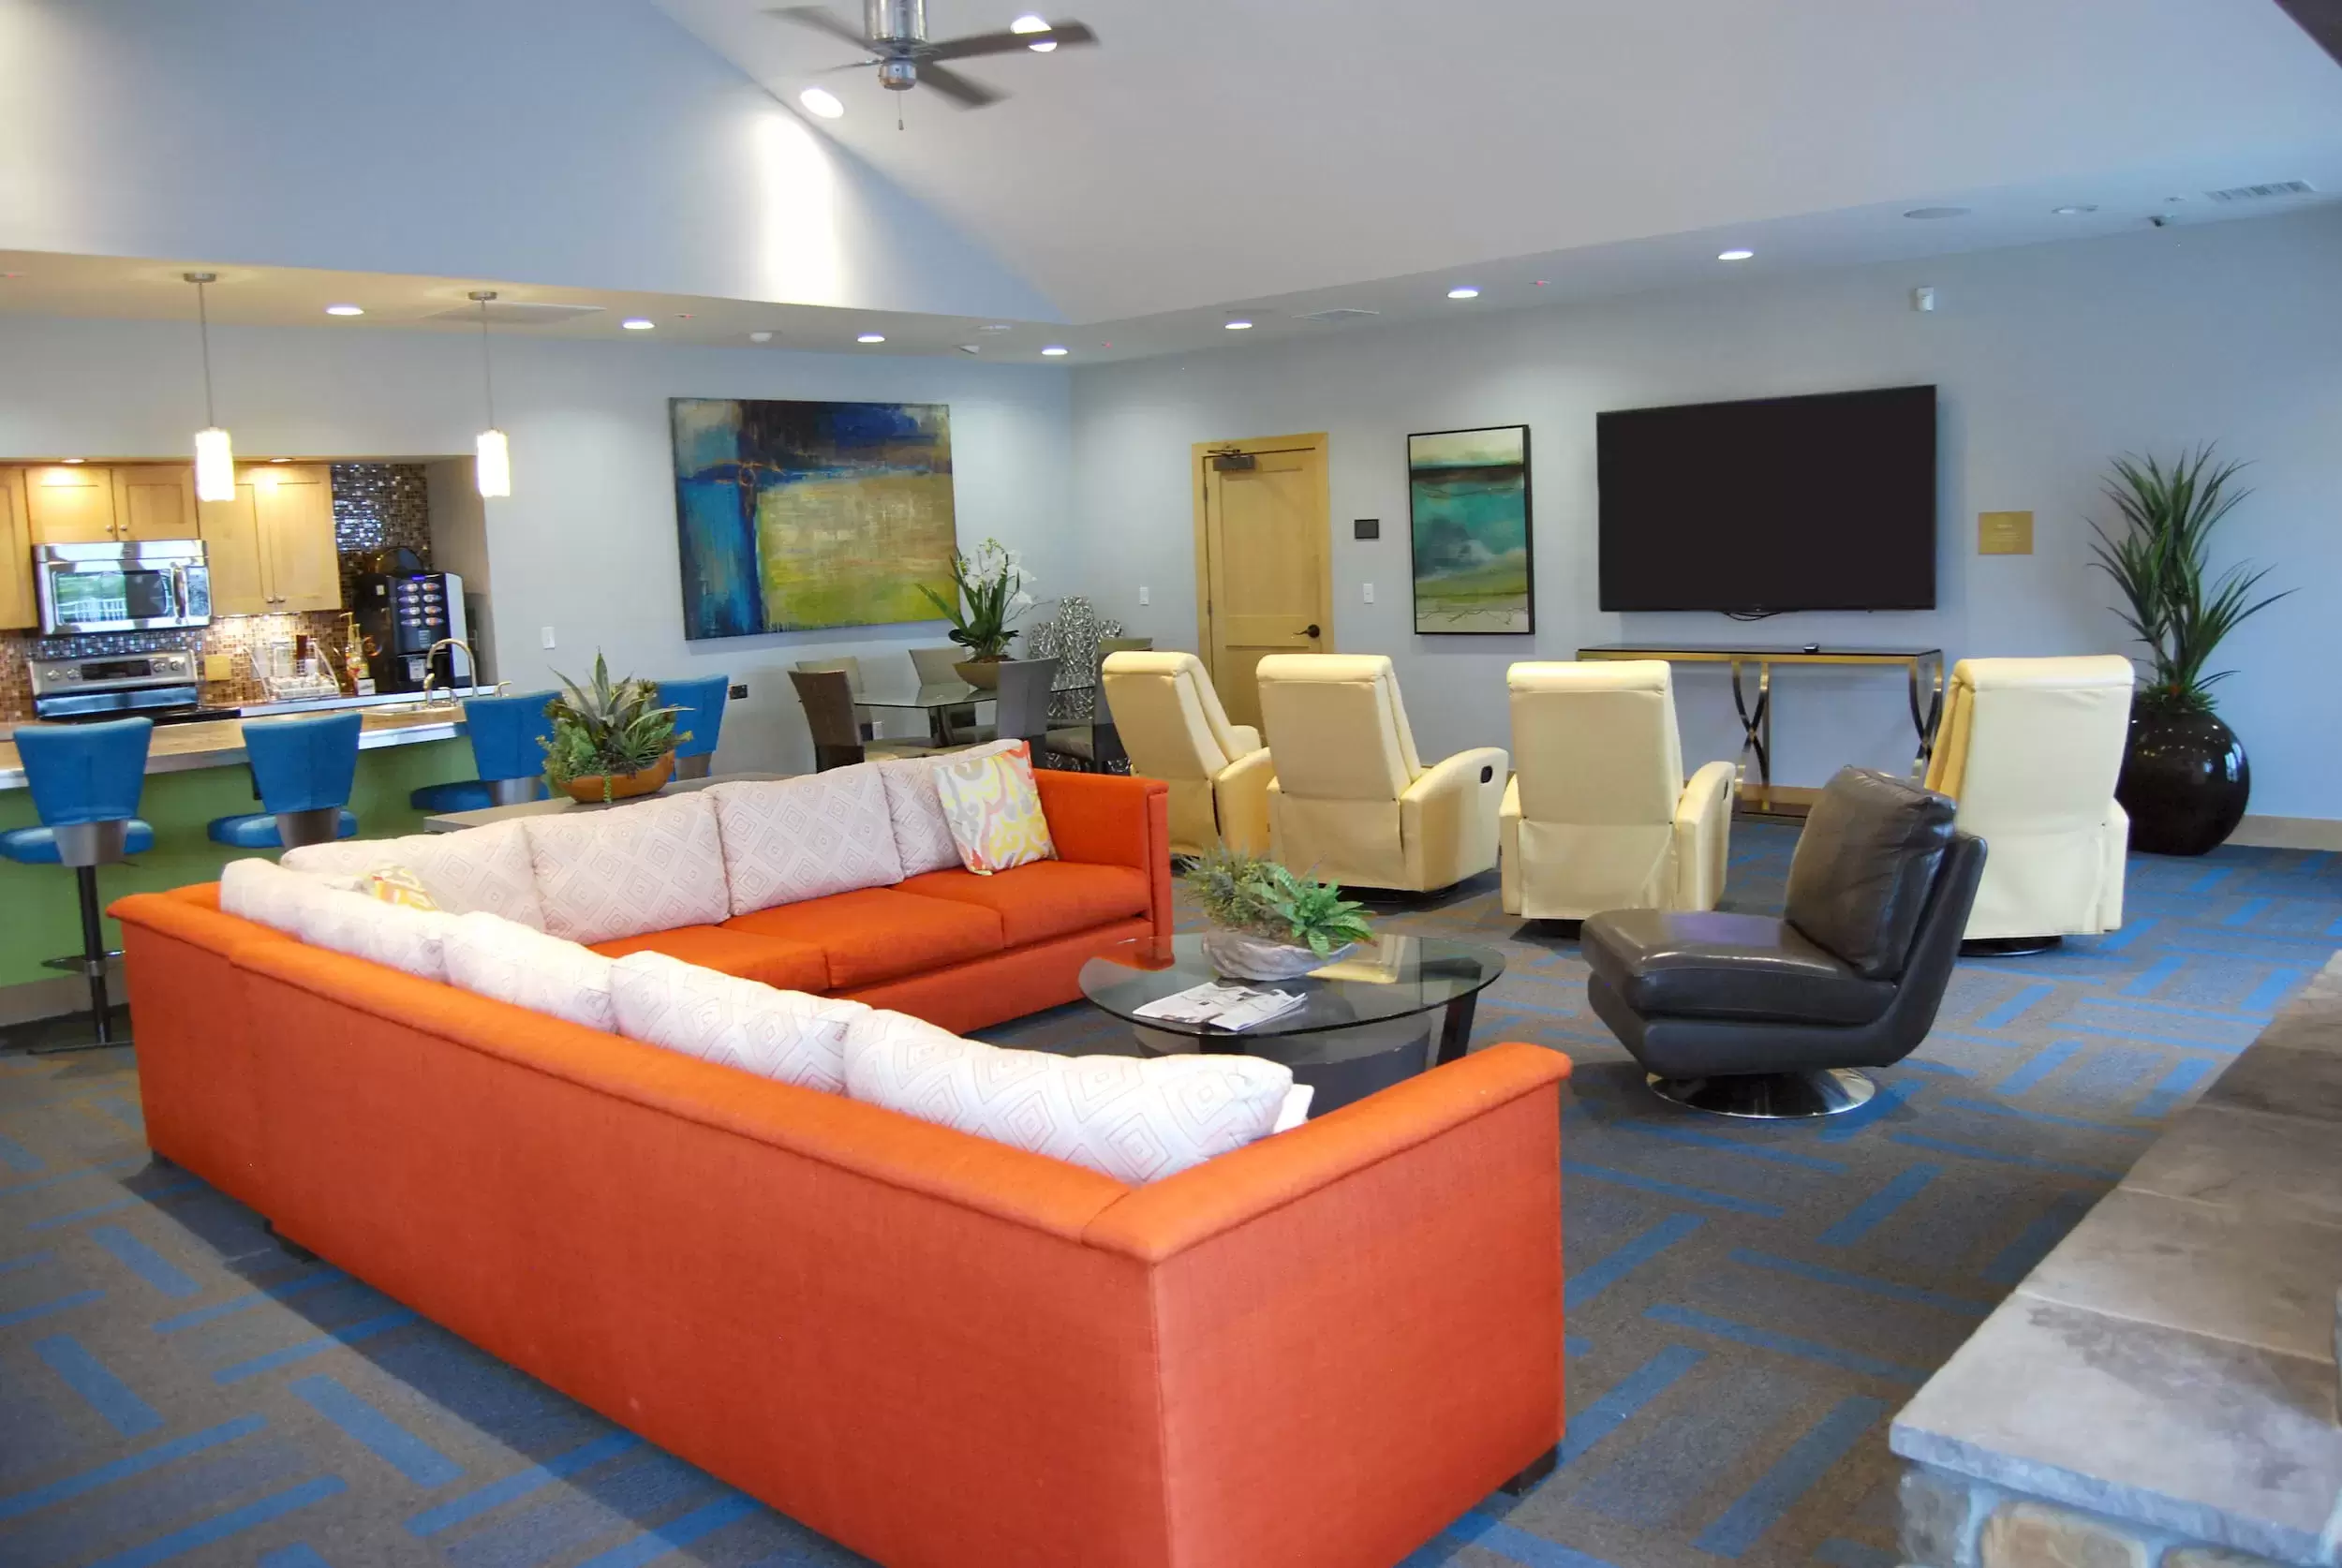 The Resident Hub, with comfortable seating and a large tv, is a great place to hang out.